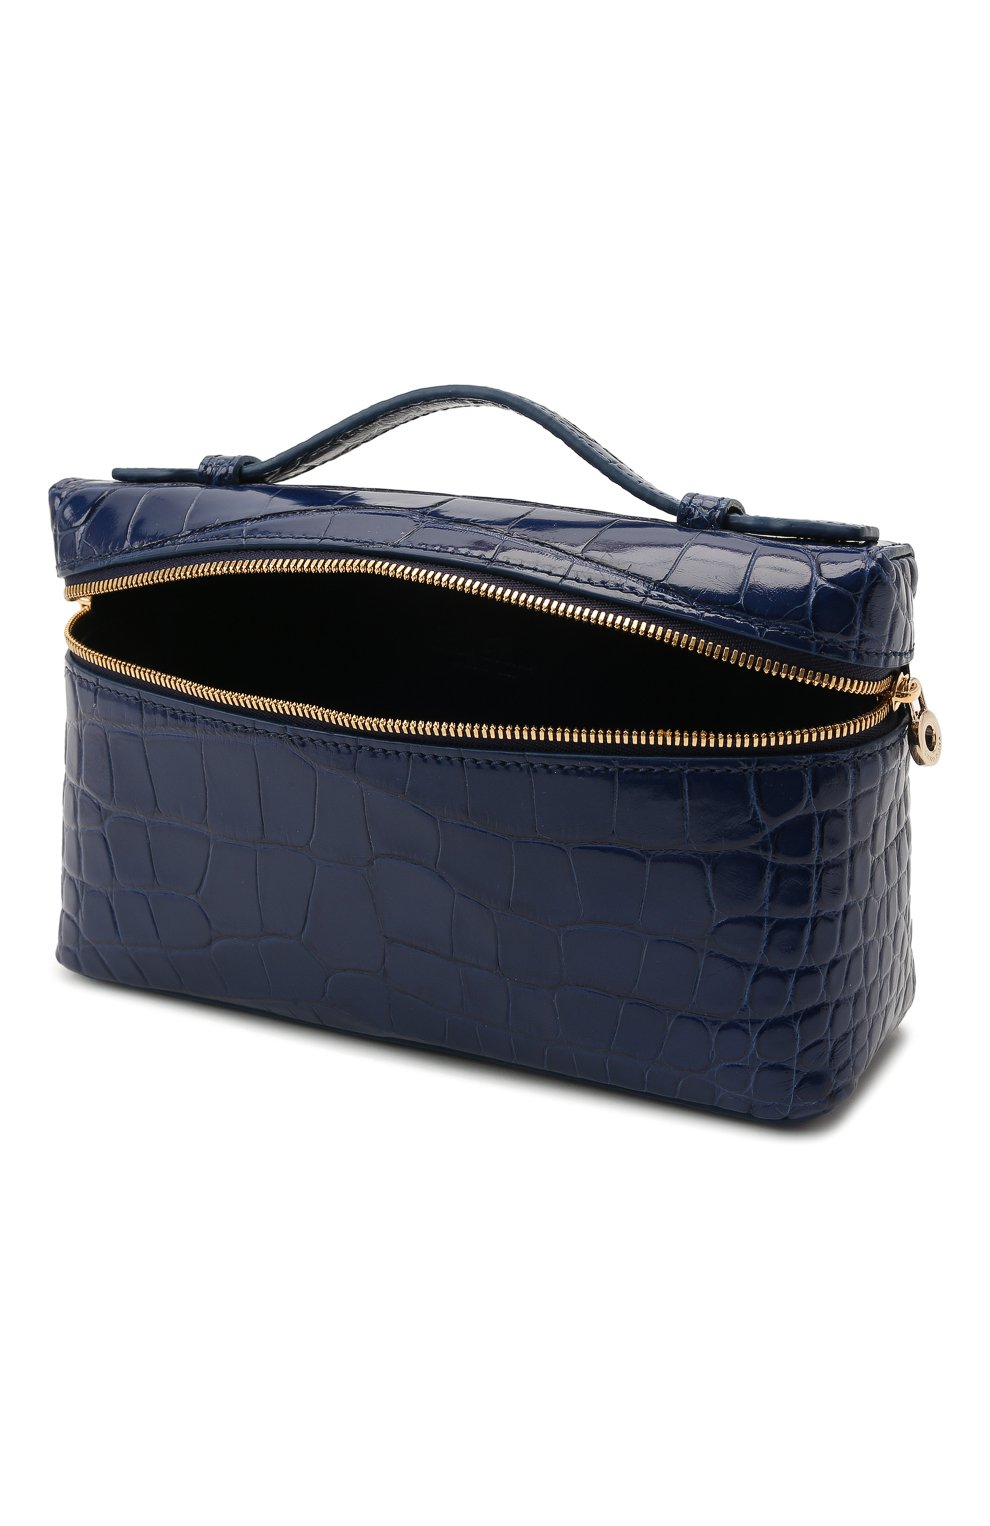 Loro Piana Alligator Extra Pocket L14 Pouch Bag in Blue